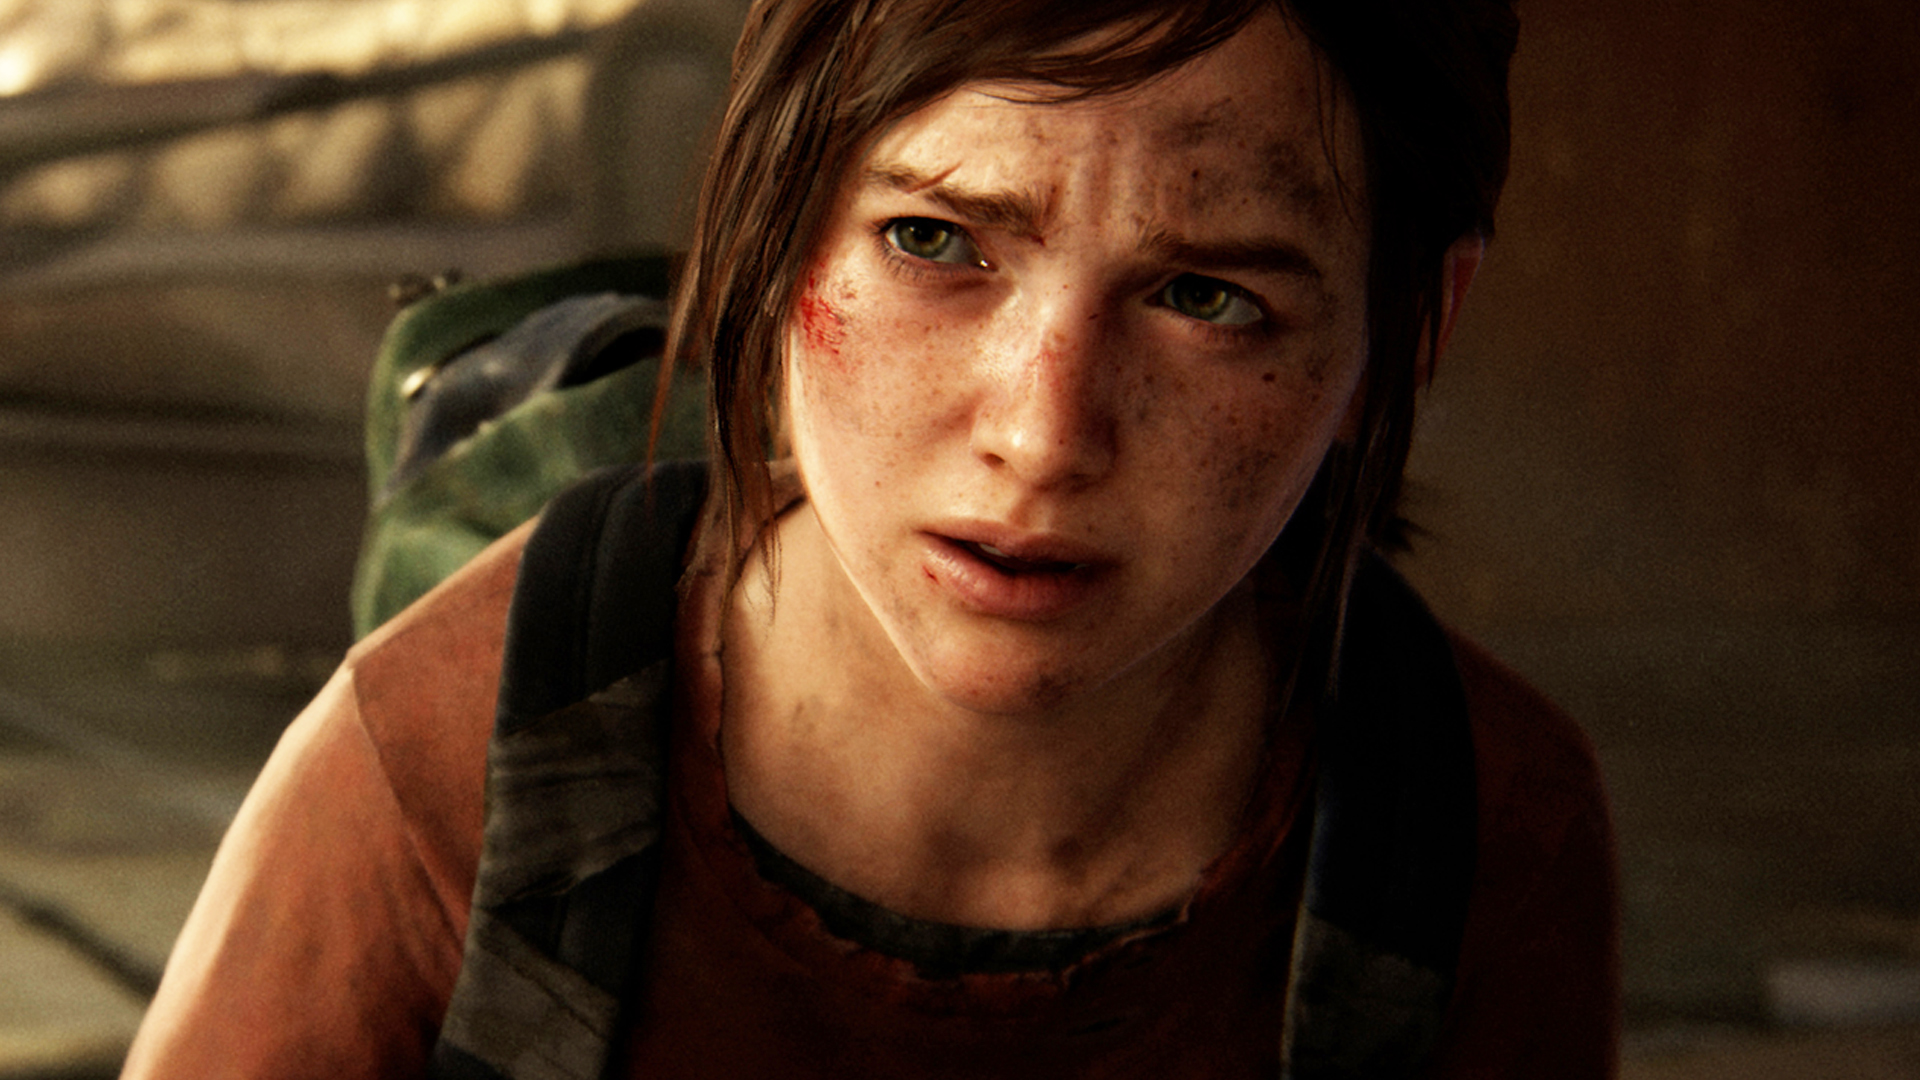 The Last of Us Part 1 PC release date, Steam pre-order, changes